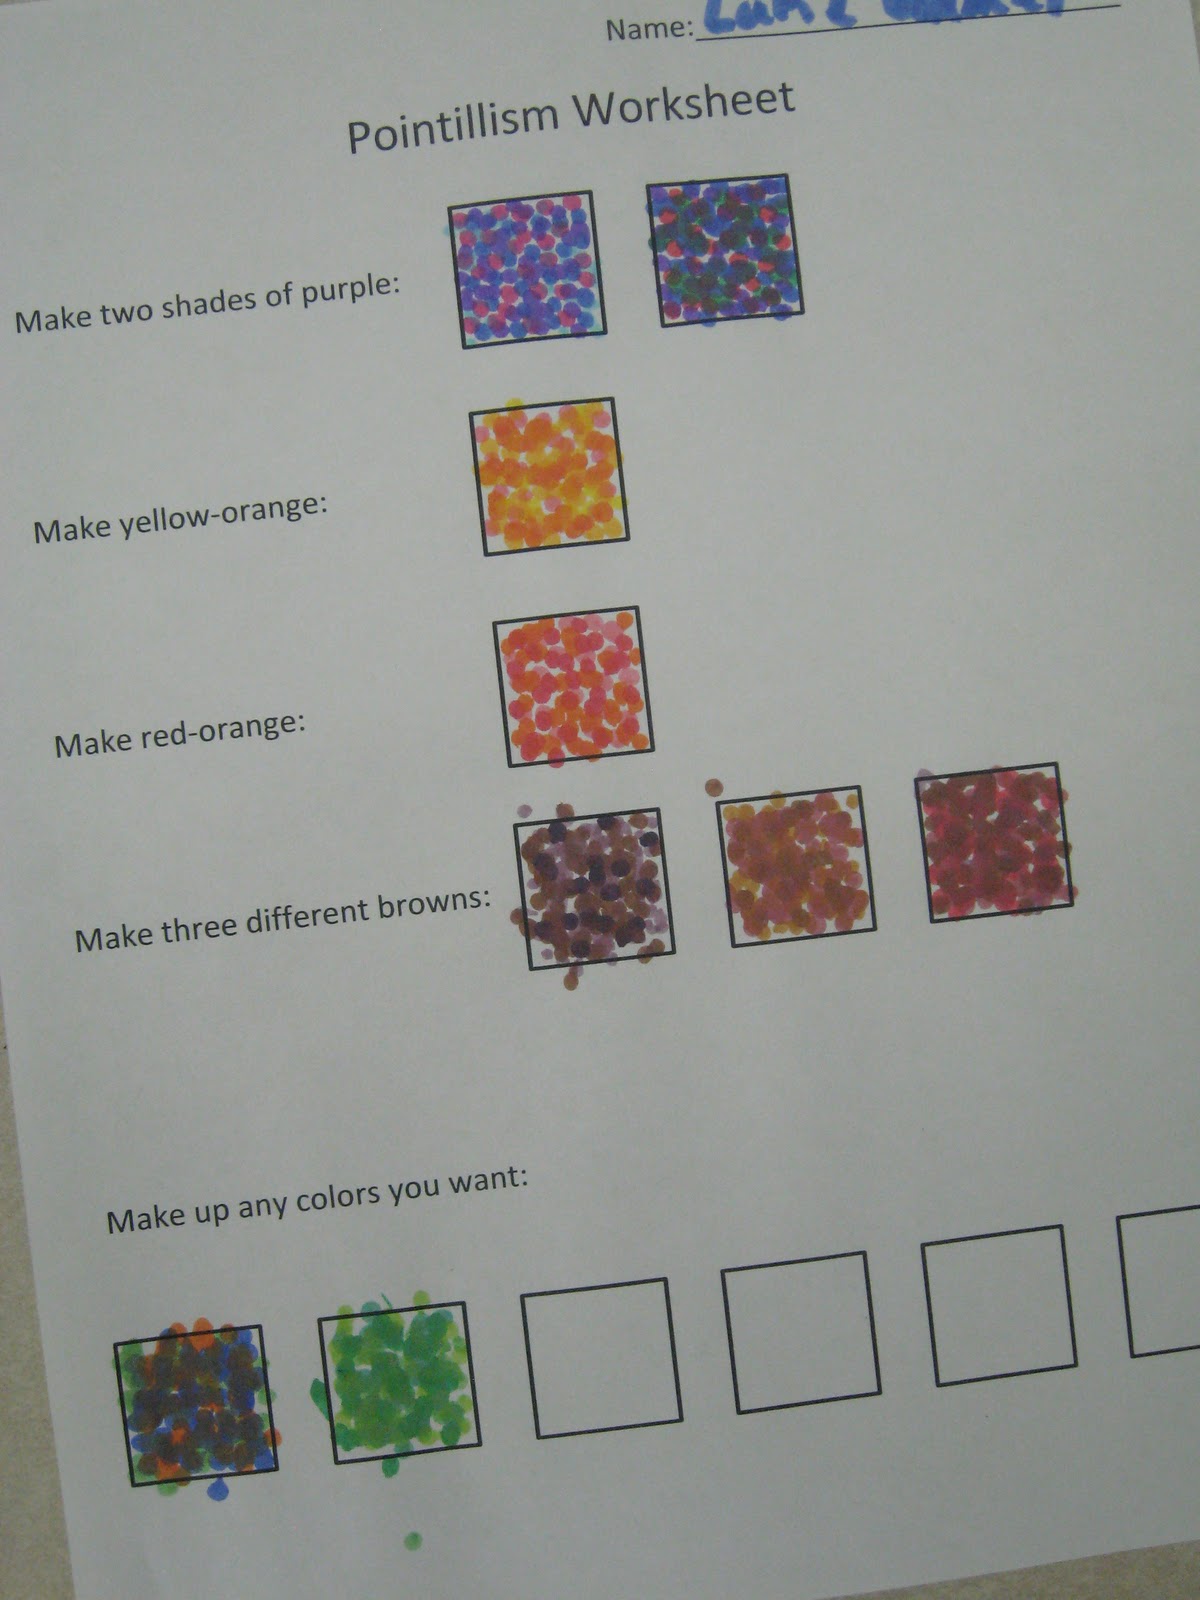 miss-young-s-art-room-5th-grade-pointillism